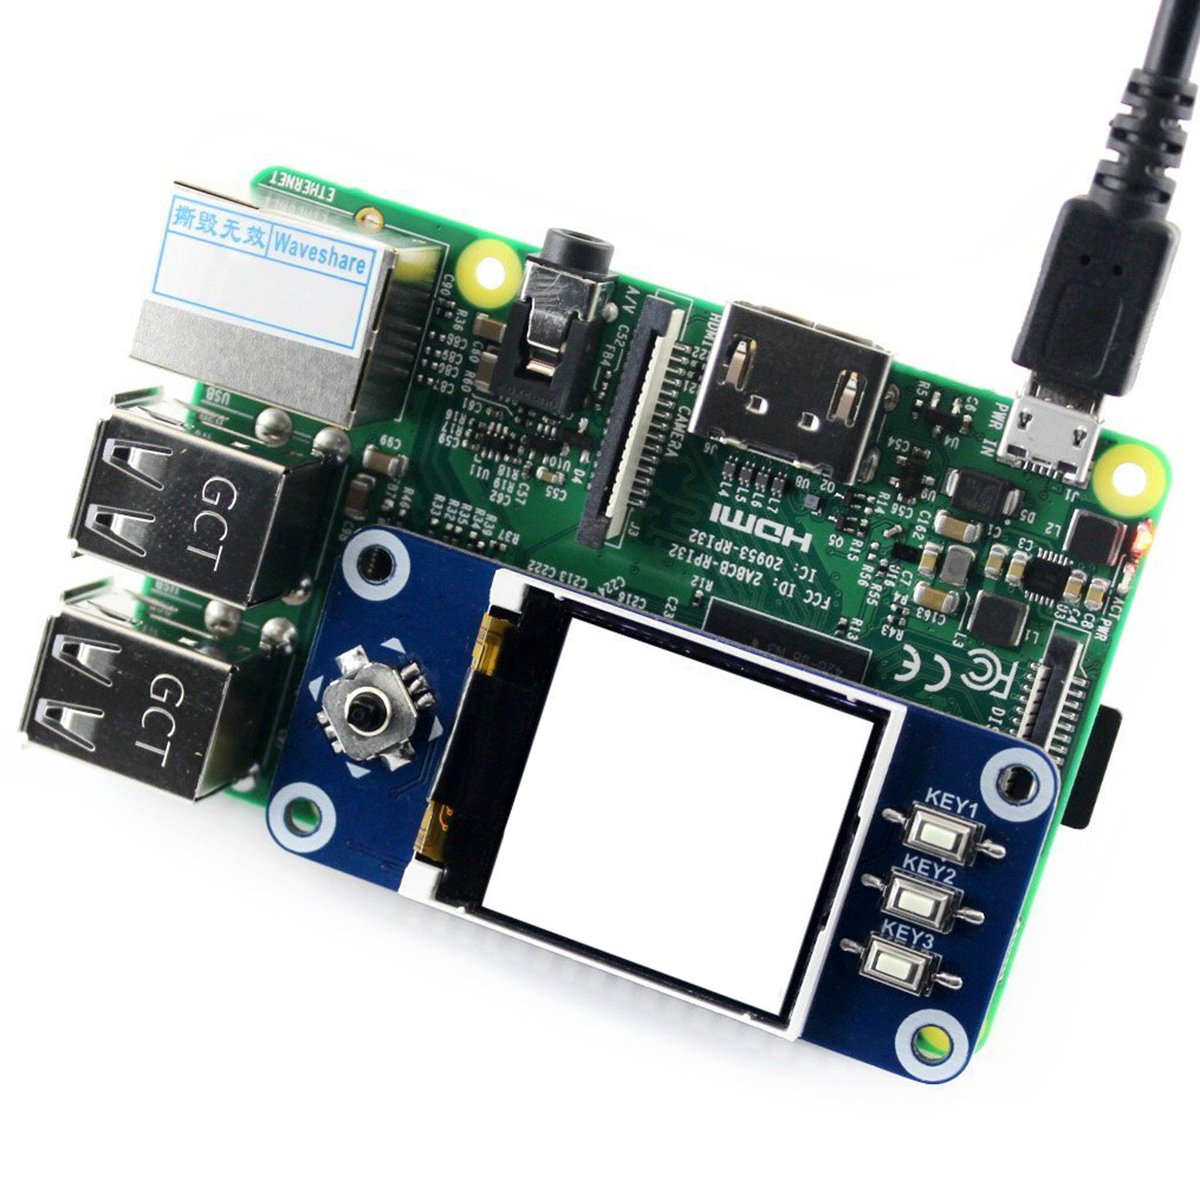 144Inch-128x128-Pixels-SPI-Interface-LCD-Display-HAT-for-Raspberry-Pi-1285050